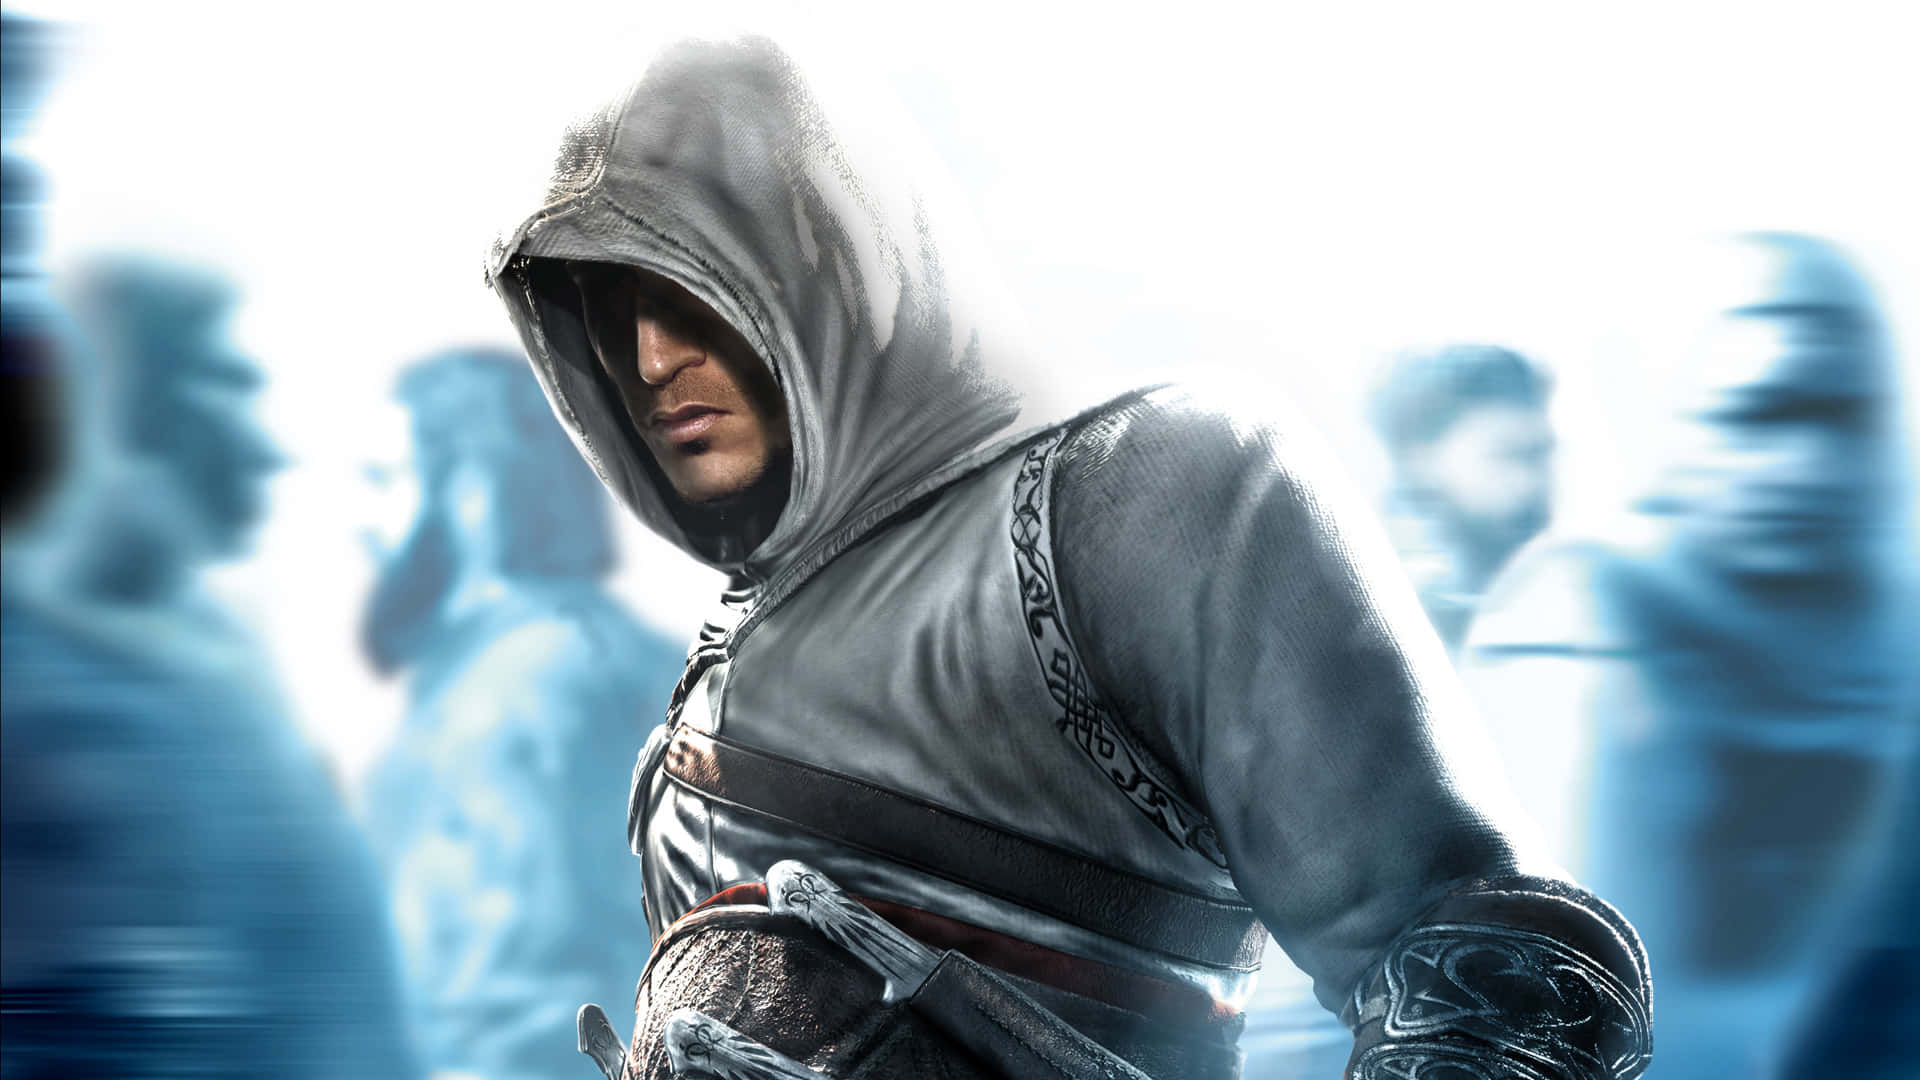 The stealthy and fearless Altair in Assassin's Creed Wallpaper